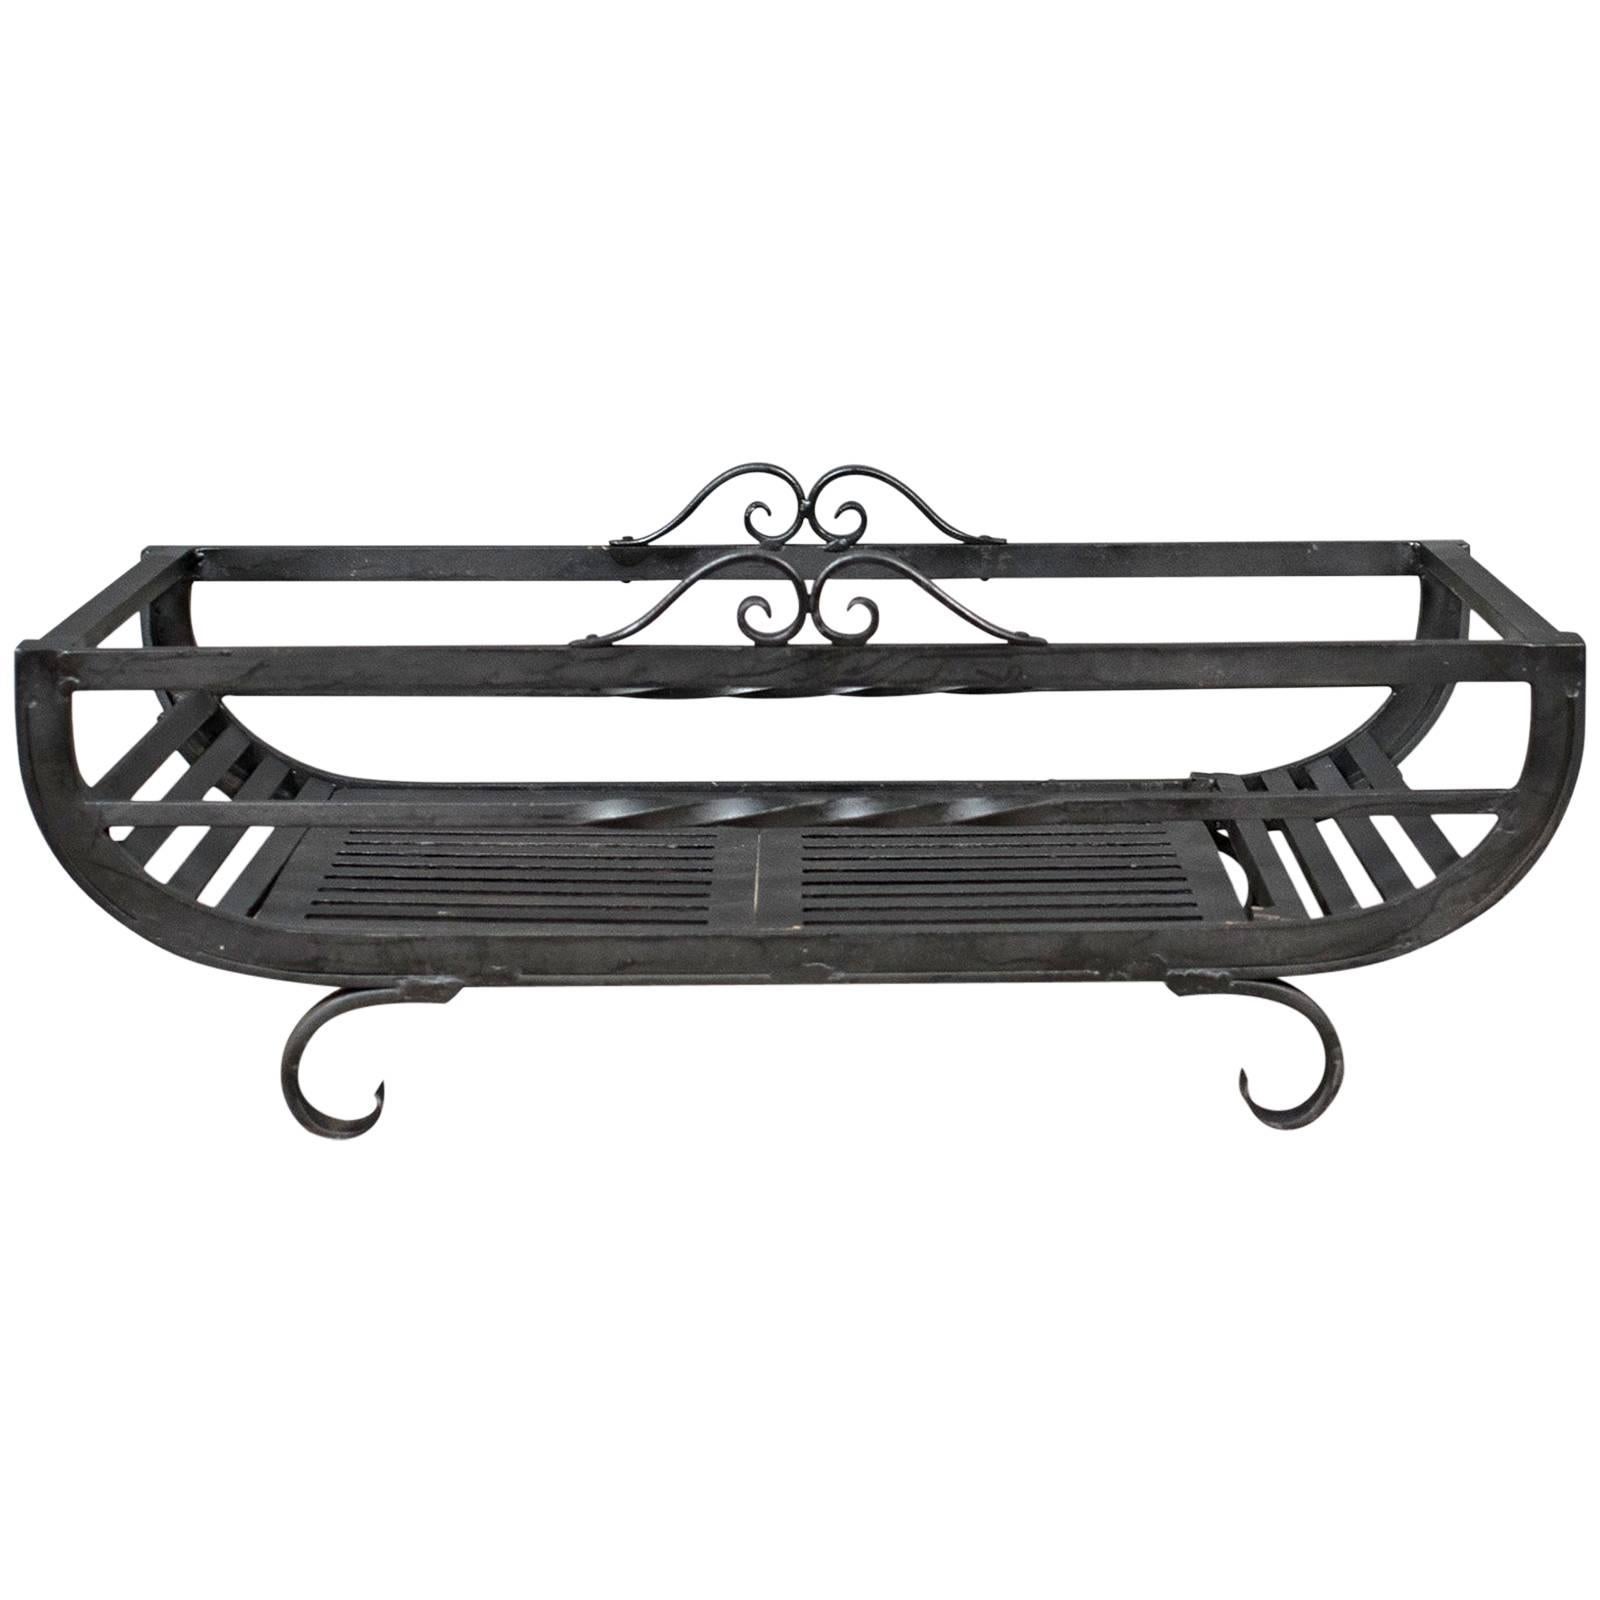 Large Fire Basket, Fireplace Iron Grate, Late 20th Century